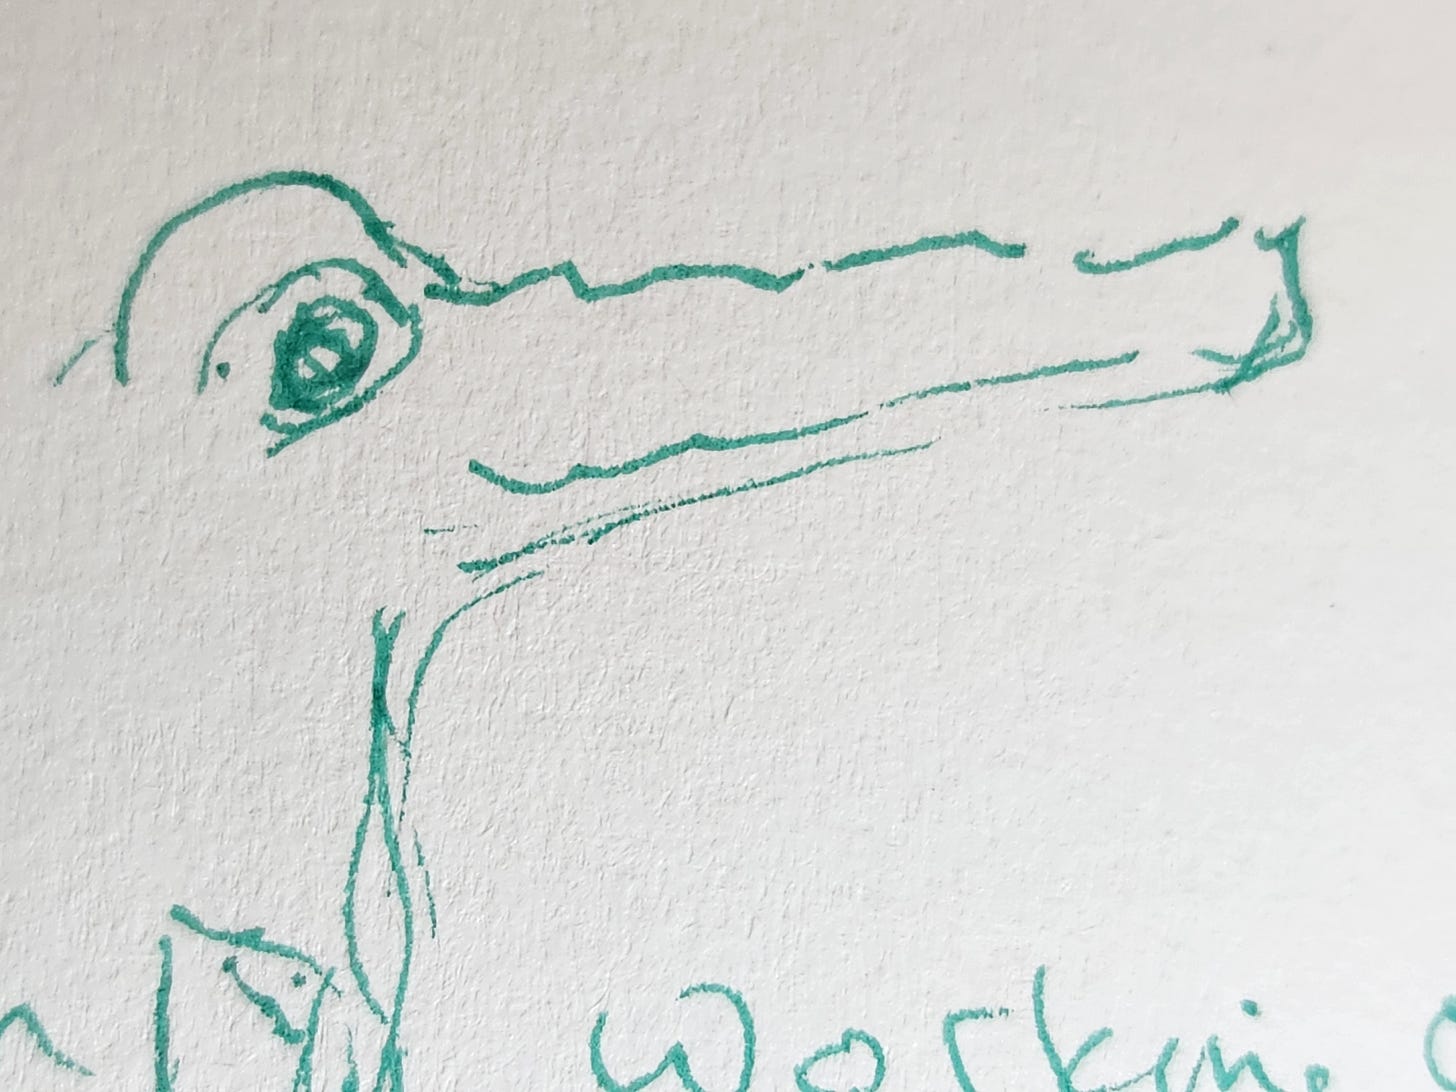 a drawing of a head and eye of what looks more like an alligator than a dragon.